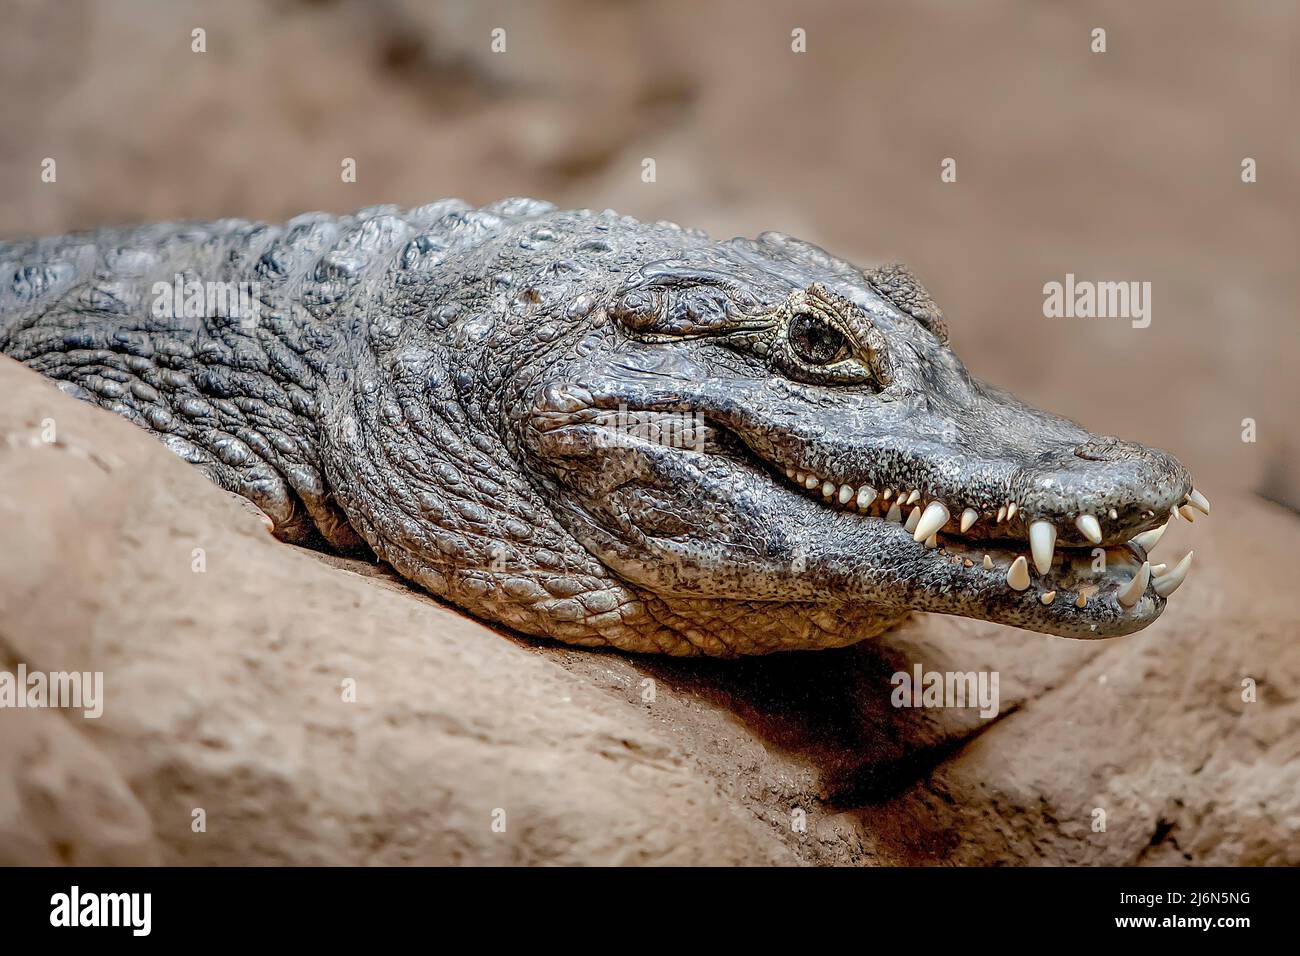 marine crocodile of the crocodylidae family, the largest reptile on the planet. Stock Photo